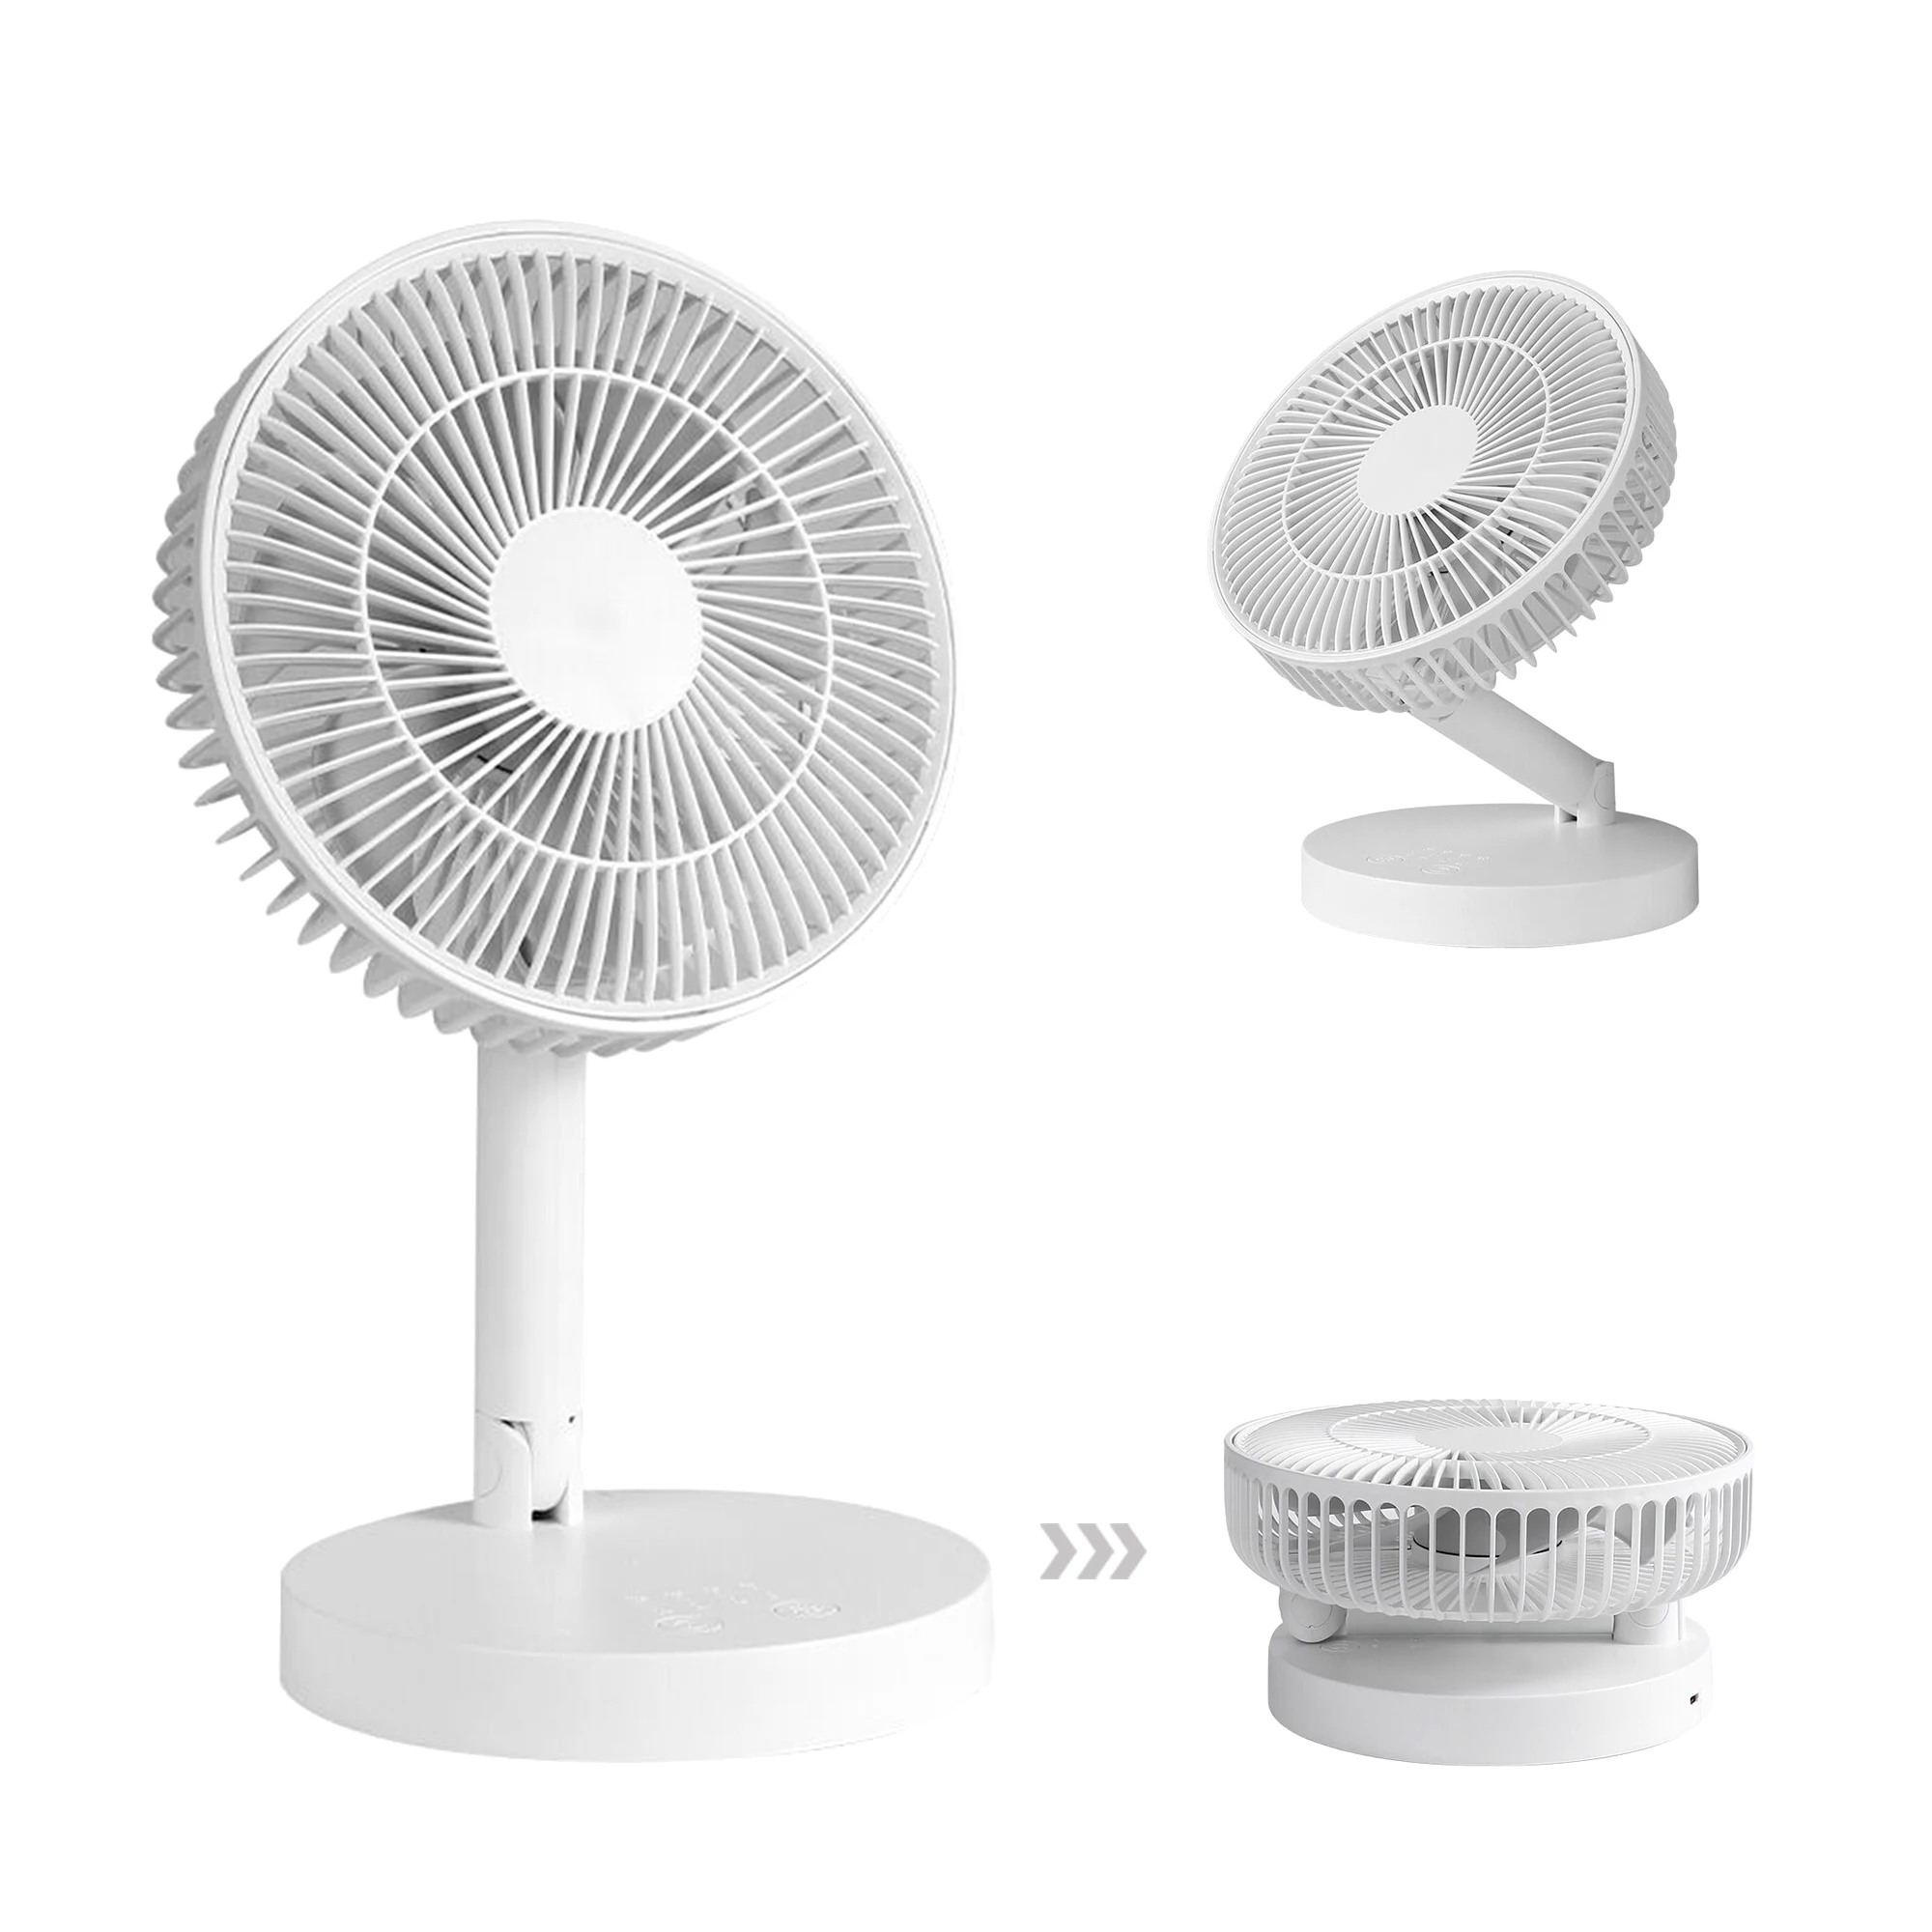 KASYDoFF Rechargeable USB Table Fan ,7200mAh Portable Mini stand Fan Cooling Small Foldable fan for Desk Home Office and bedroom enlarge